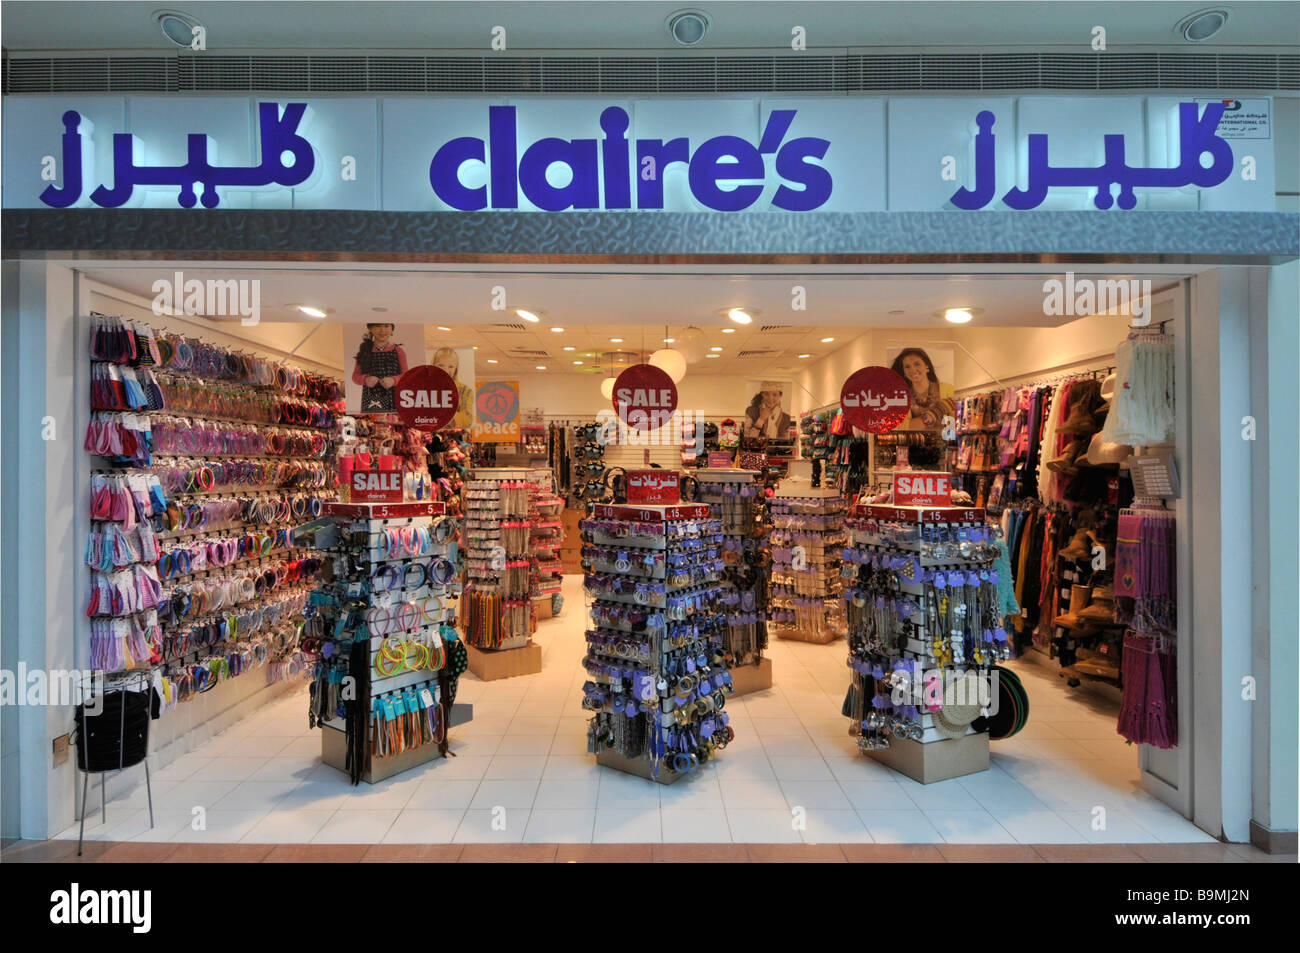 Marina shopping mall entrance to Claires accessories an American retail buisness shop front bilingual multilingual sign Abu Dhabi UAE Middle East Asia Stock Photo